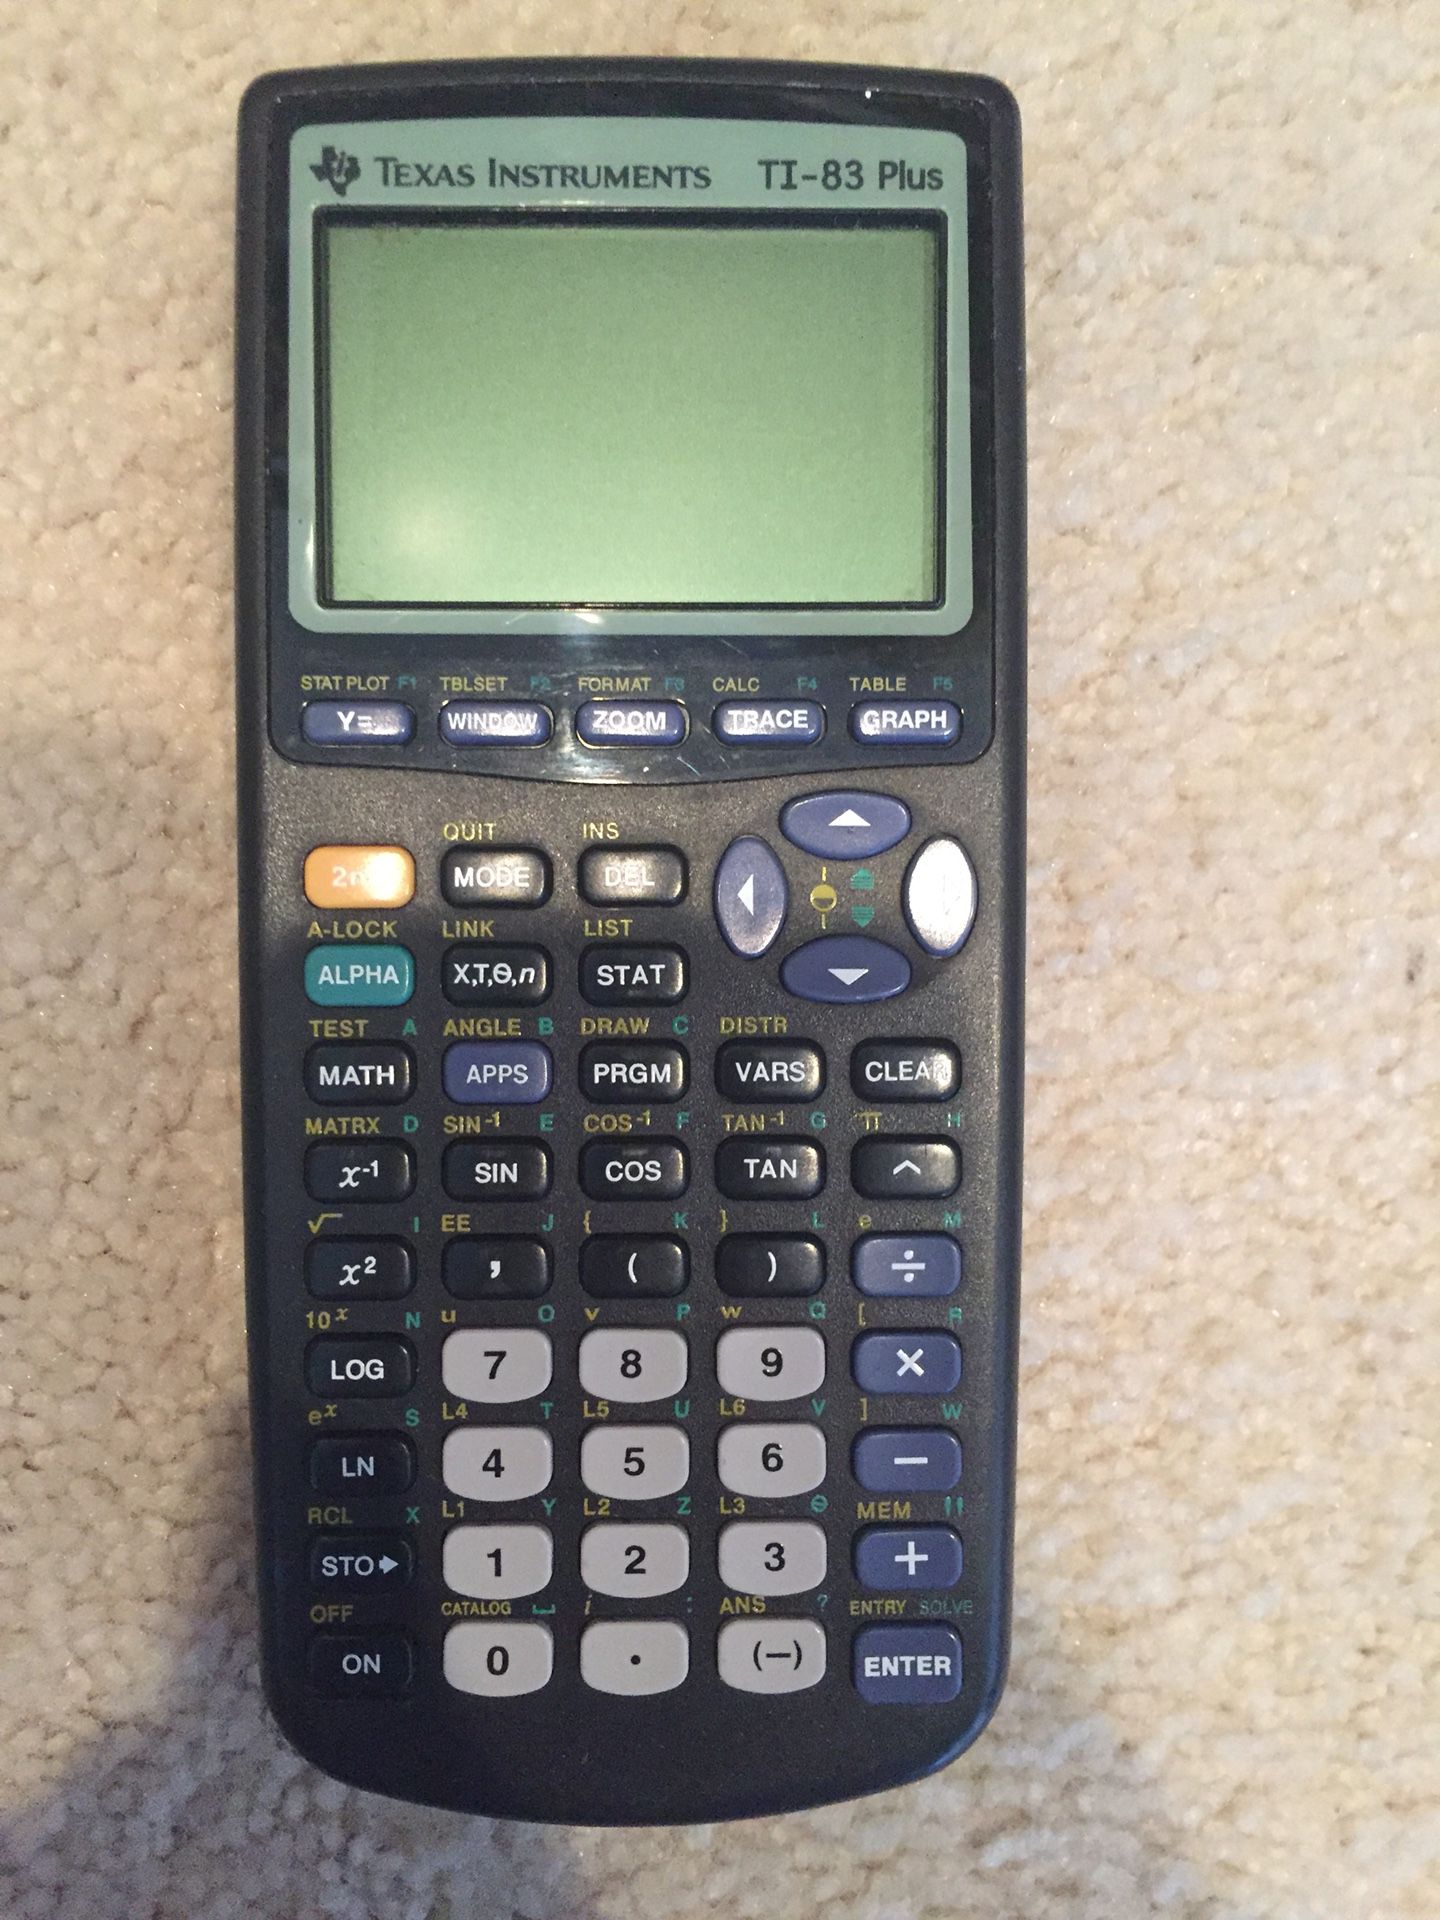 GREAT CONDITION Texas Instruments TI 83 Plus Graphing Calculator